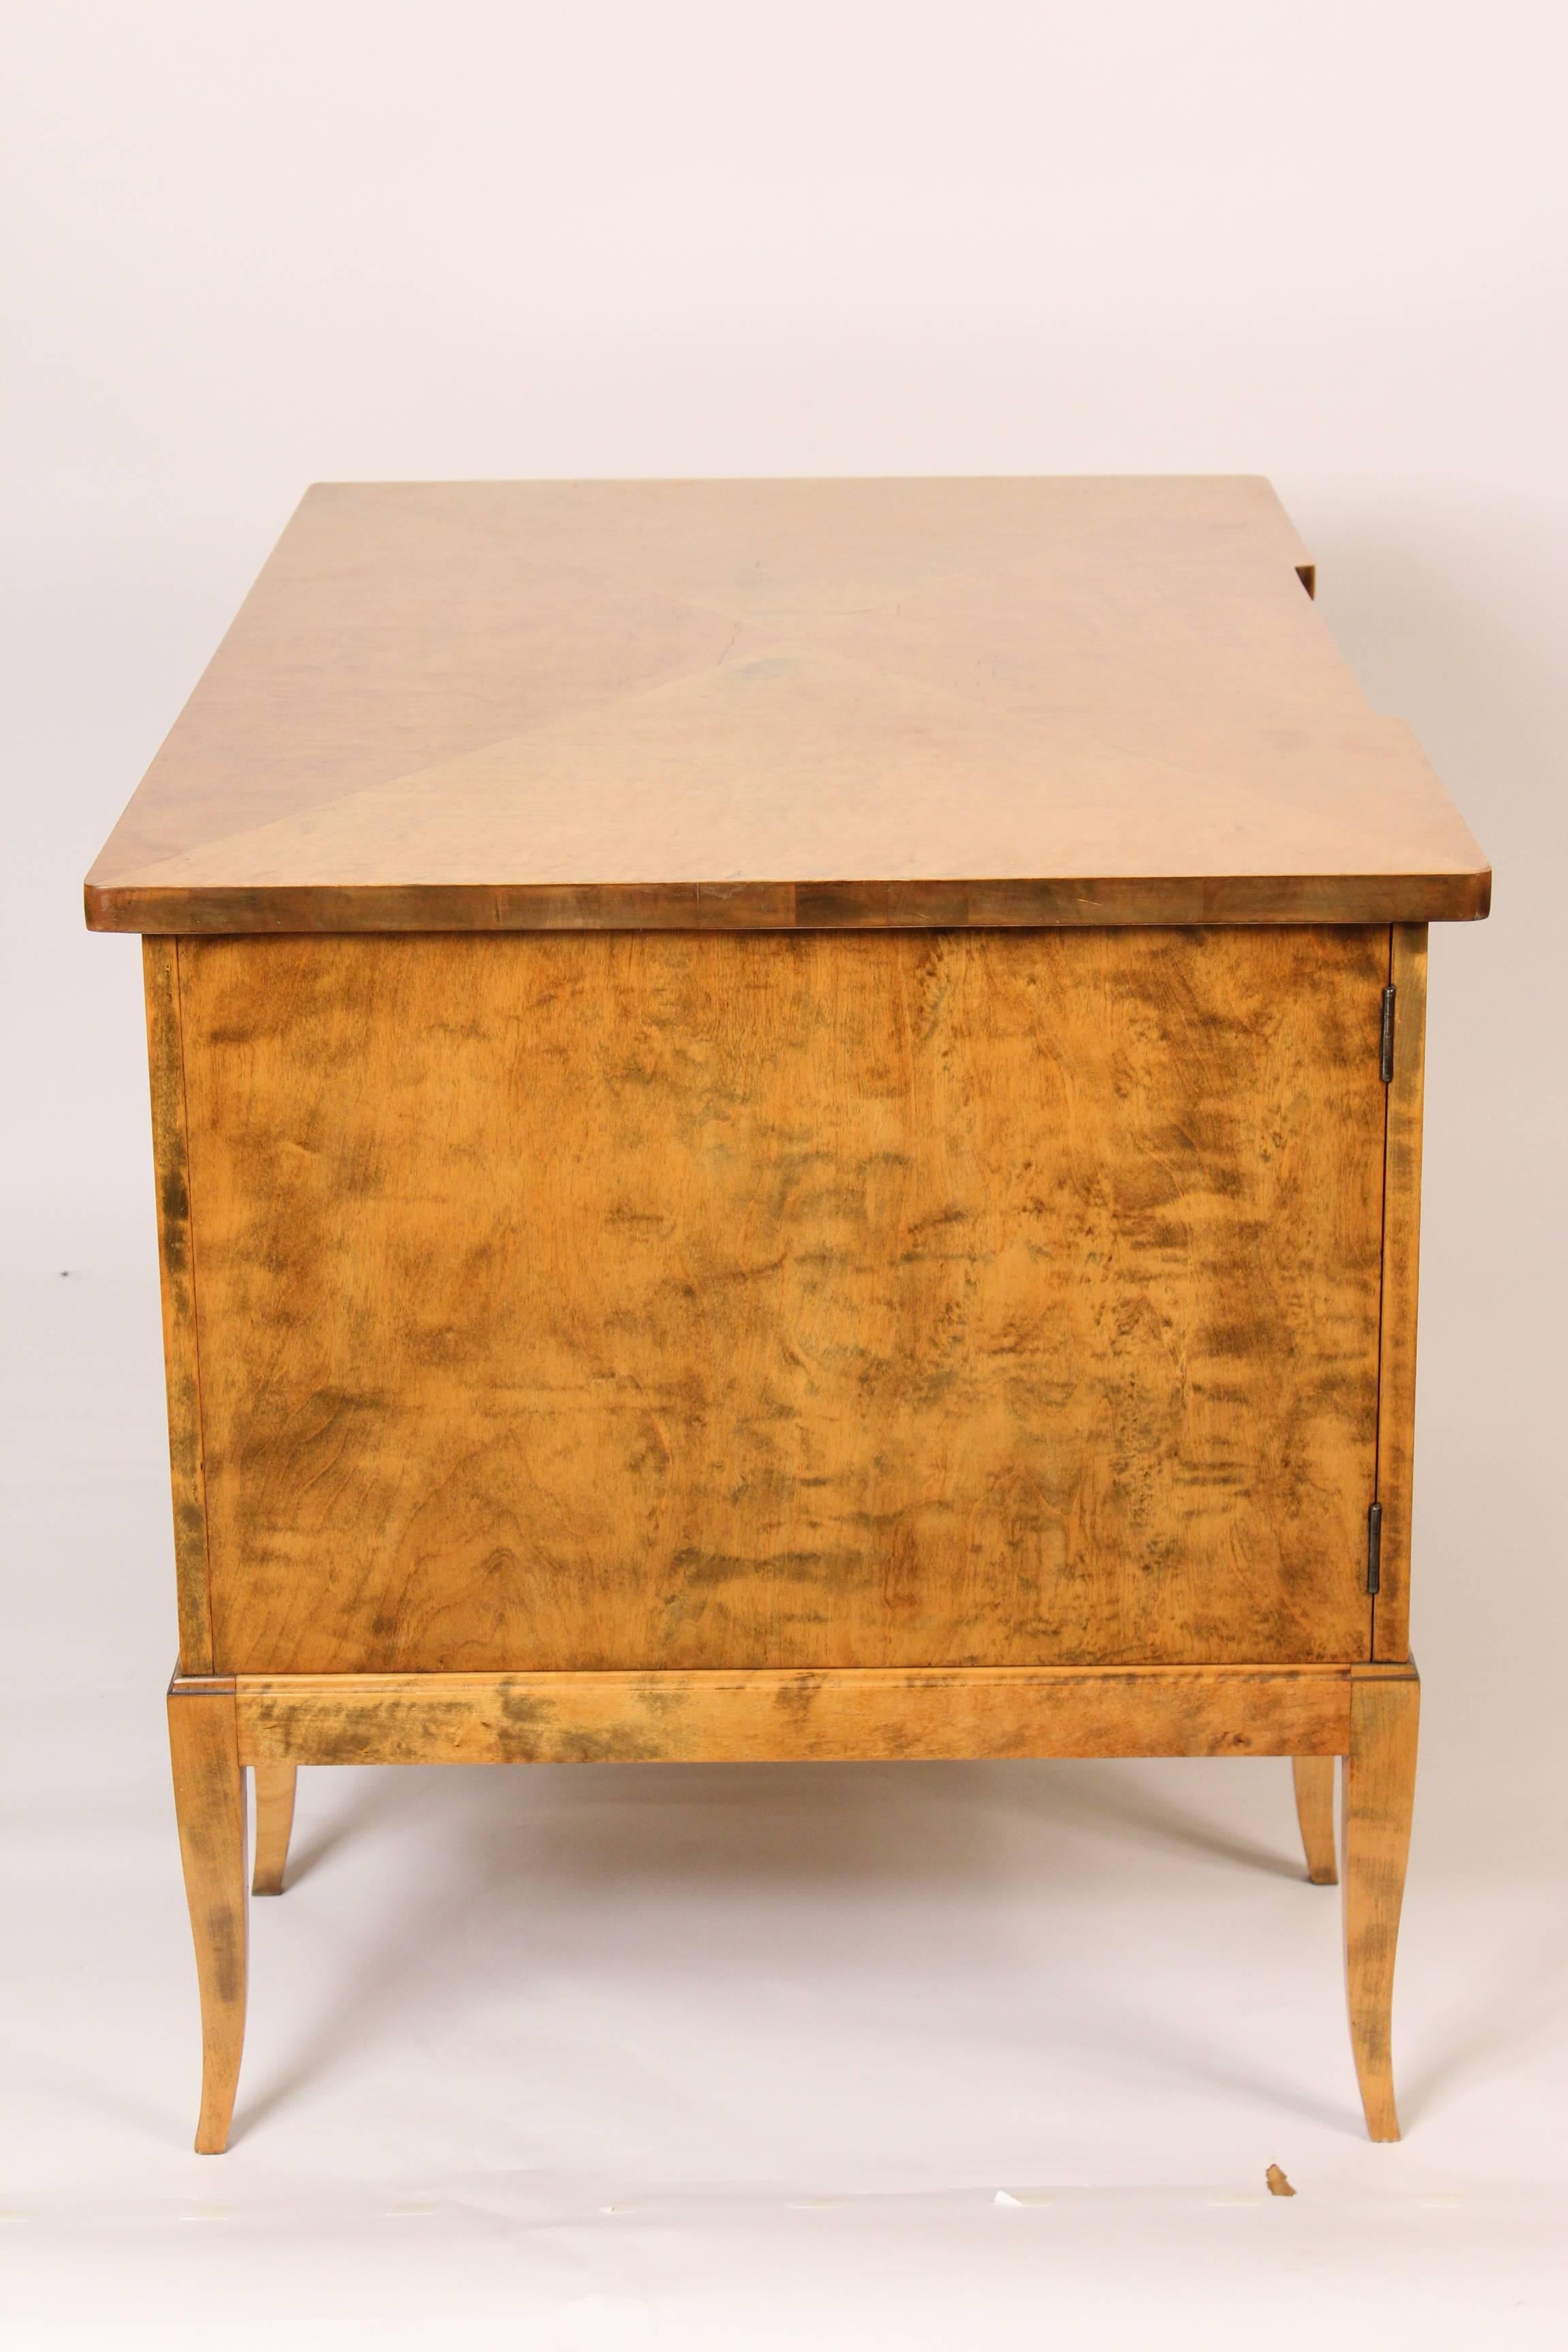 Biedermeier style desk with highly figured birch, circa mid-20th century. This desk has very fine quality figured birch, the construction is excellent with dove tailed drawers and the side panels are dovetailed into the base. This desk would go well